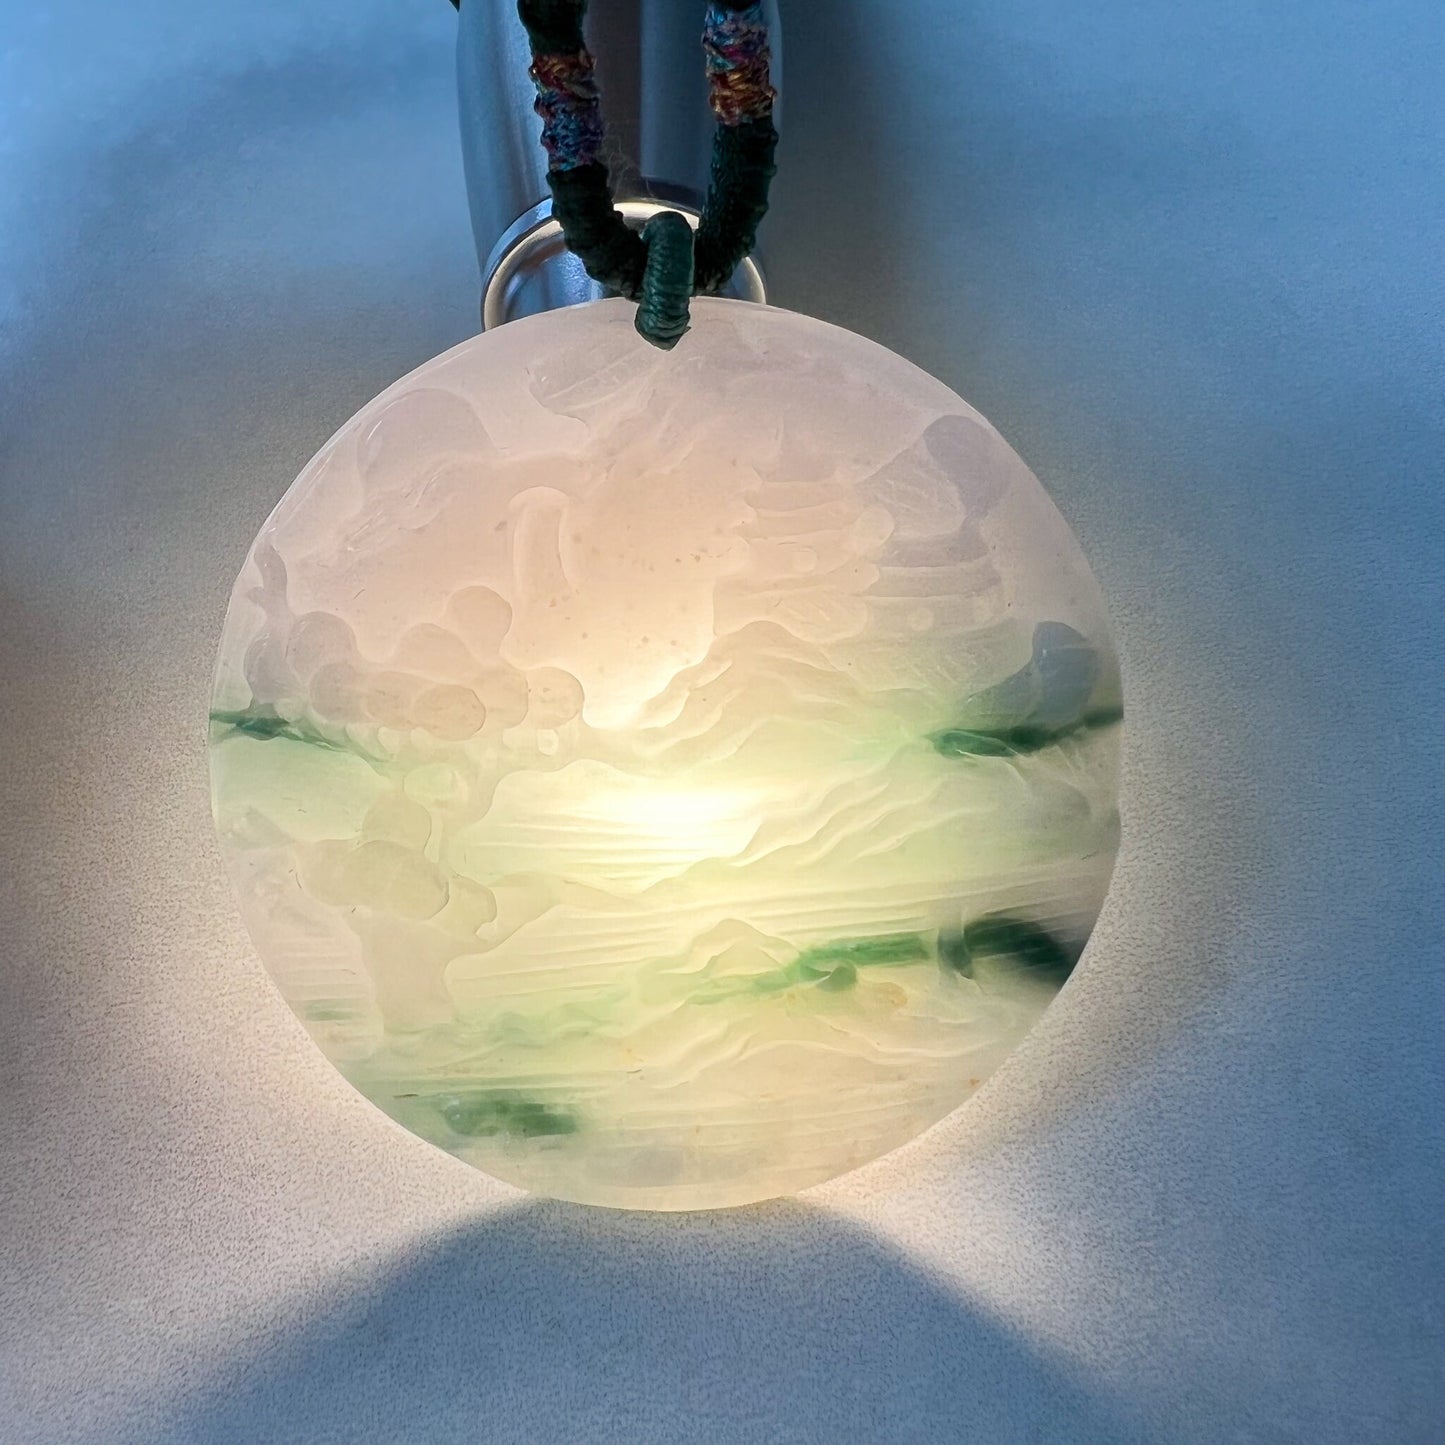 Jadeite Jade Landscape Mountain Forest River Scenery Hand Carved Pendant Necklace, YJ-0622-0389315 - AriaDesignCollection